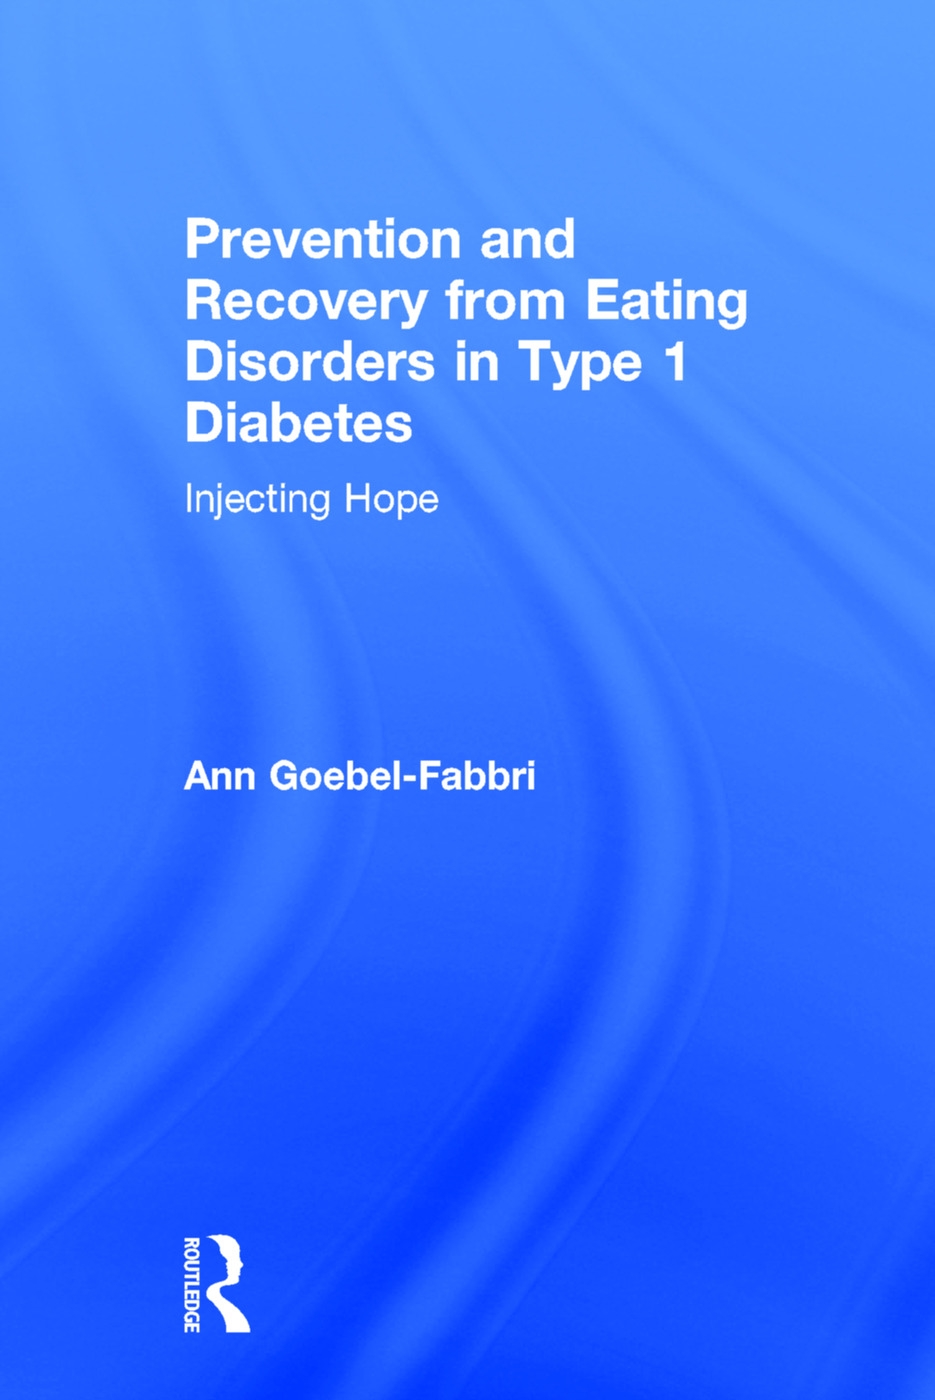 Prevention and Recovery from Eating Disorders in Type 1 Diabetes: Injecting Hope